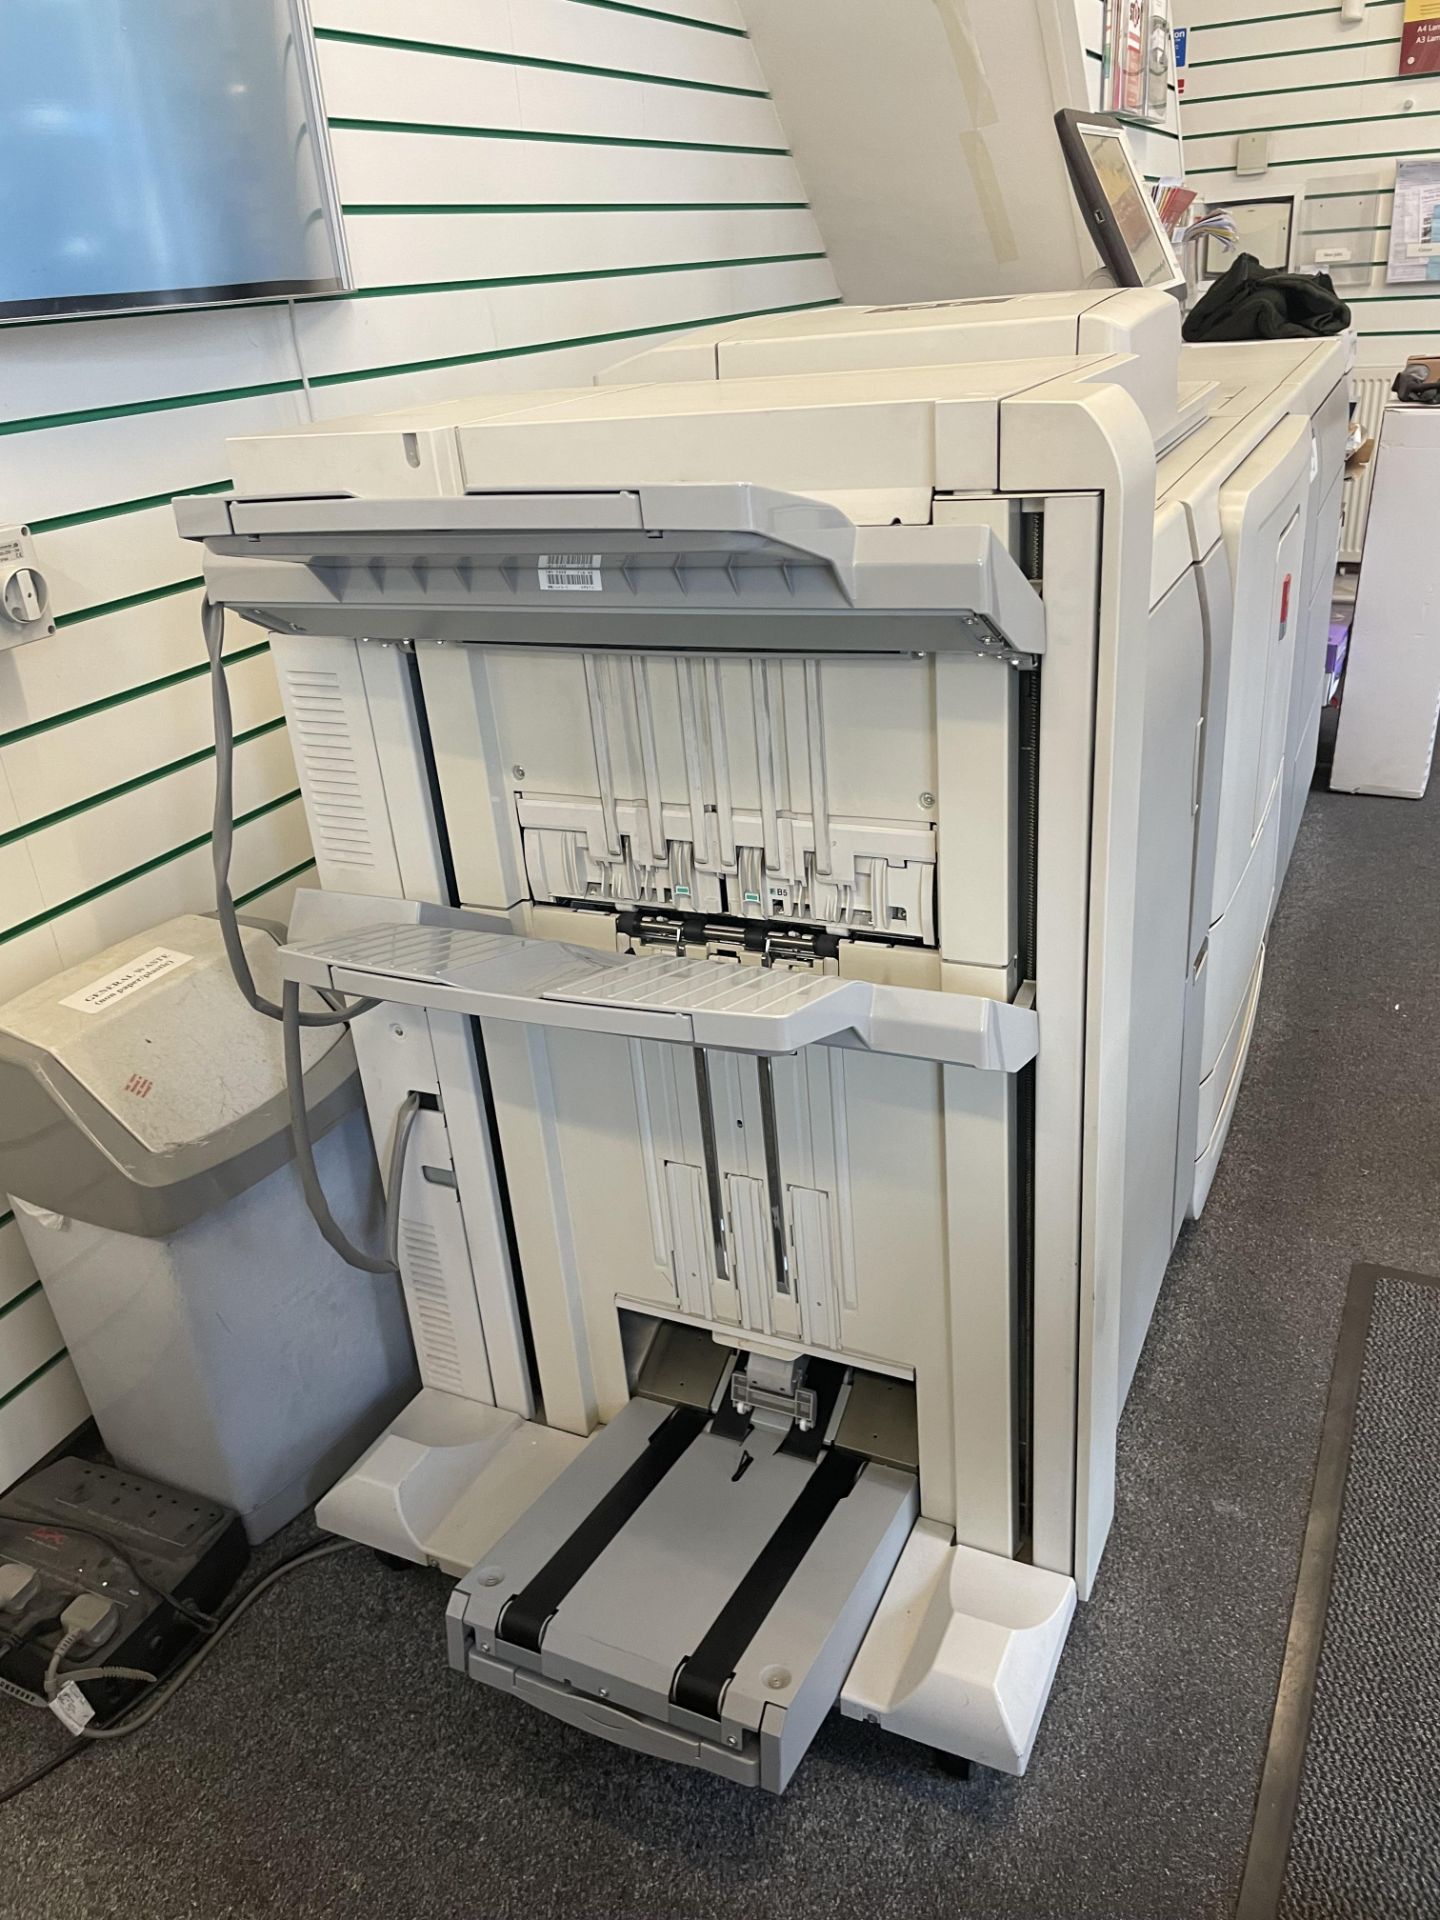 Canon Oce VP110 Multifunction Digital Print Press, Serial No. 698001102, Year of Manufacture 2012 - Image 4 of 5